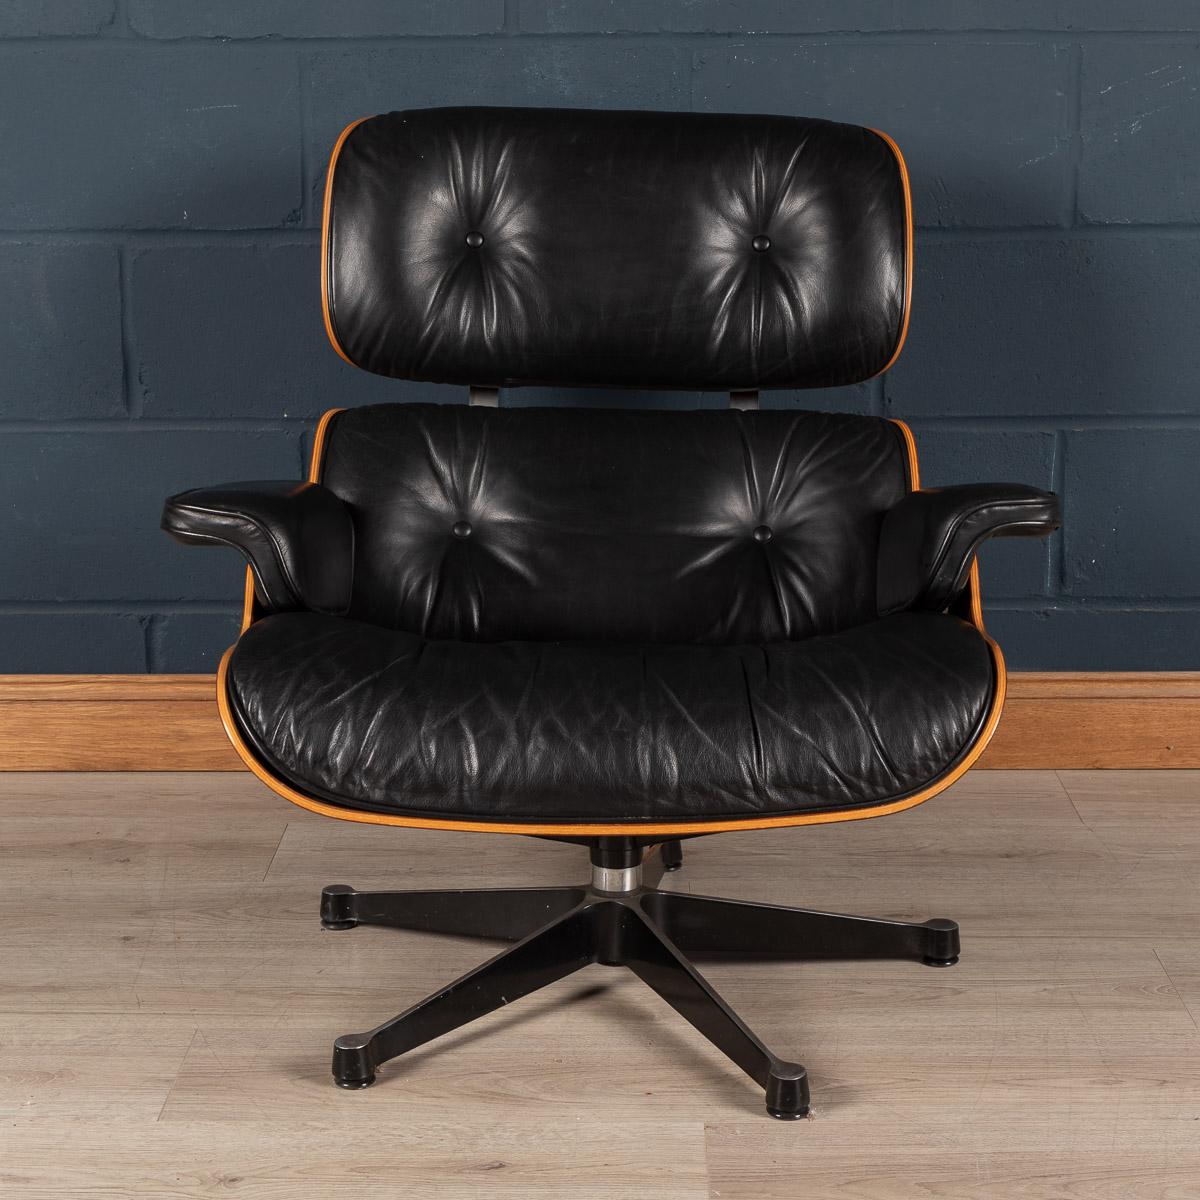 German Iconic Eames Black Leather Lounge Chair by Vitra, c.1980